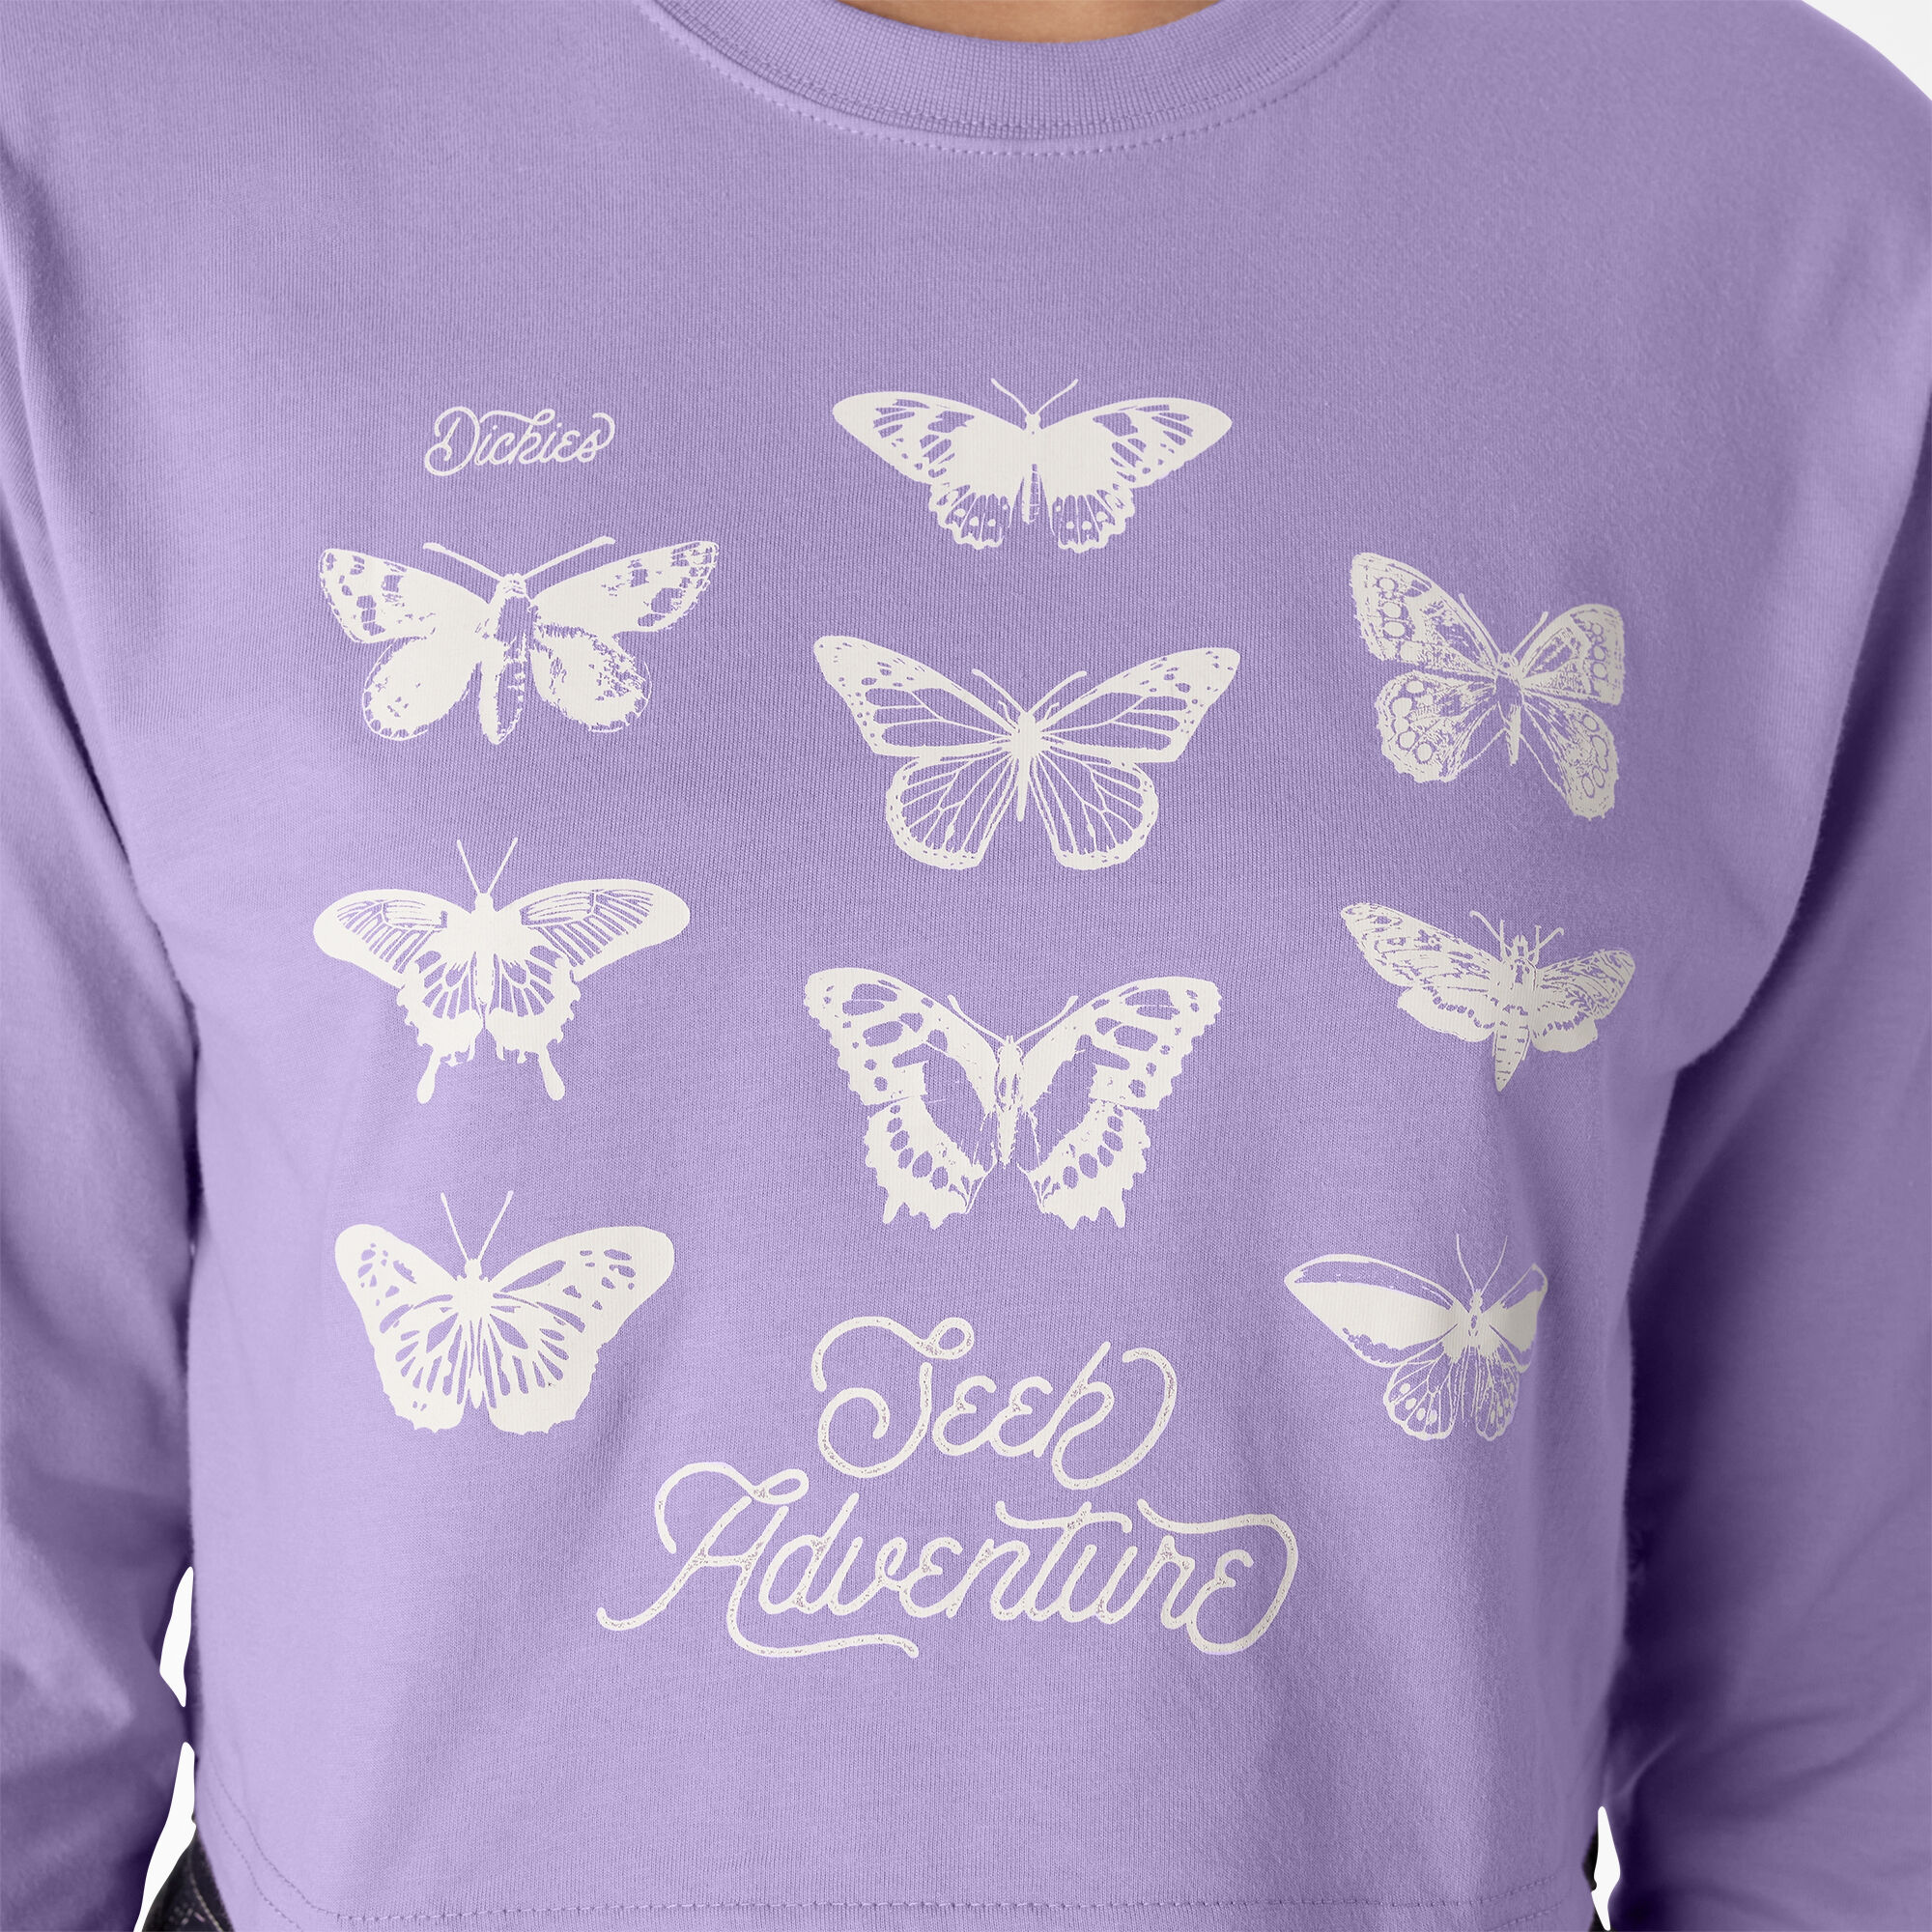 Women's Butterfly Graphic Long Sleeve Cropped T-Shirt